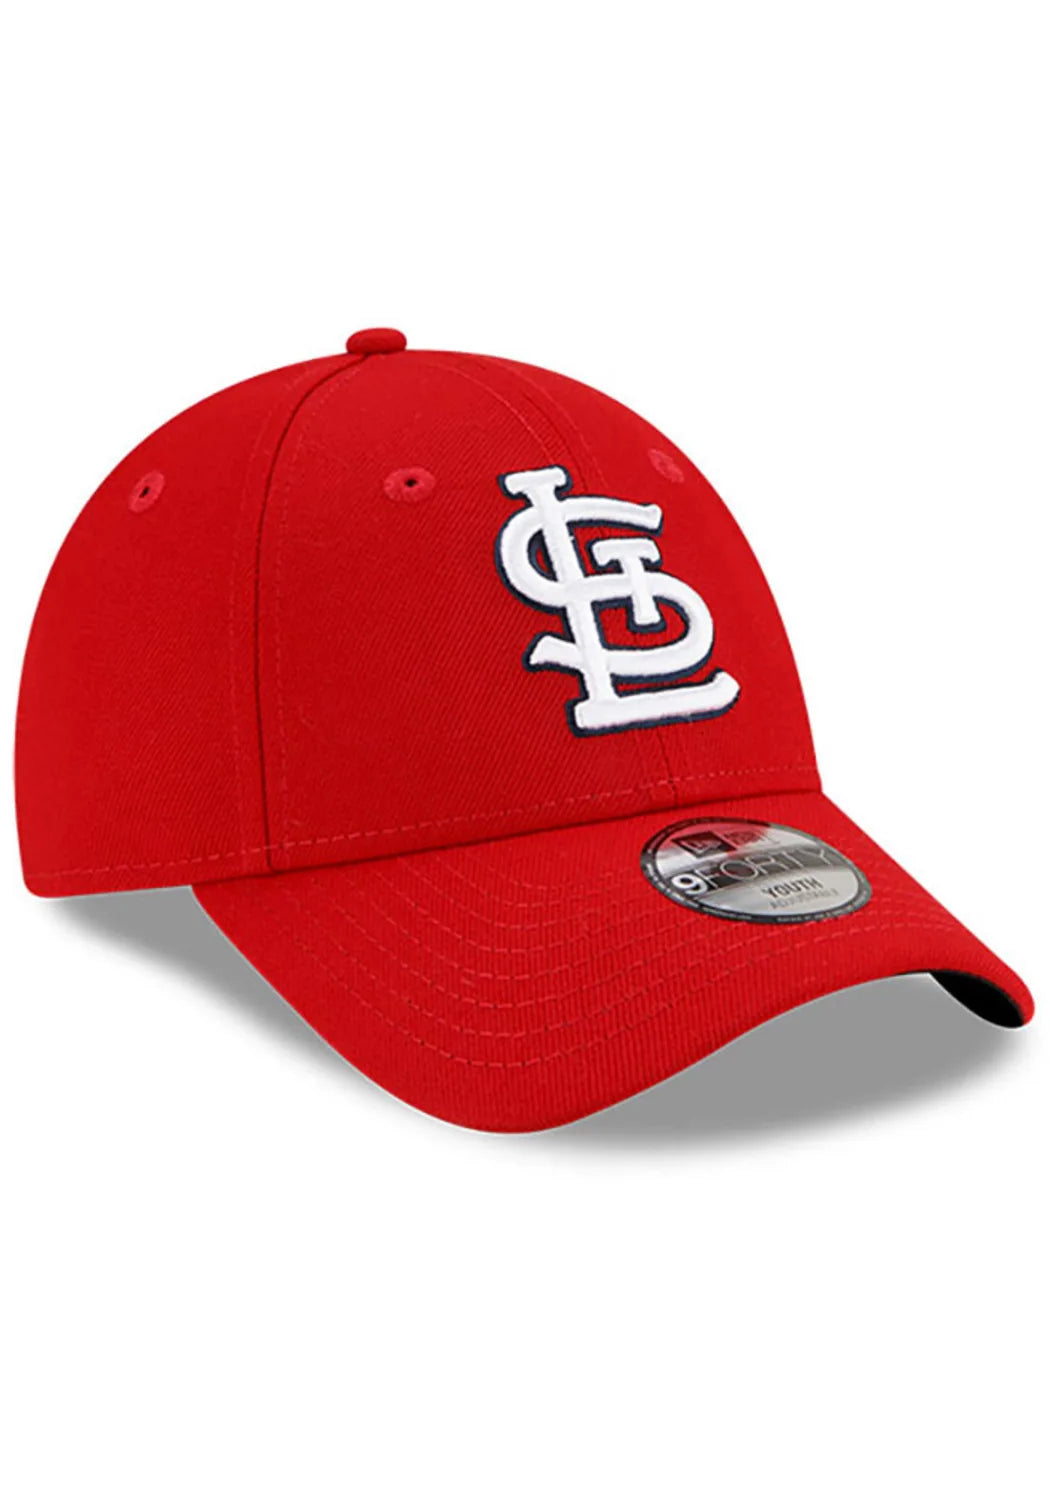 St. Louis Cardinals Youth New Era MLB The League Red 9FORTY Adjustable Cap